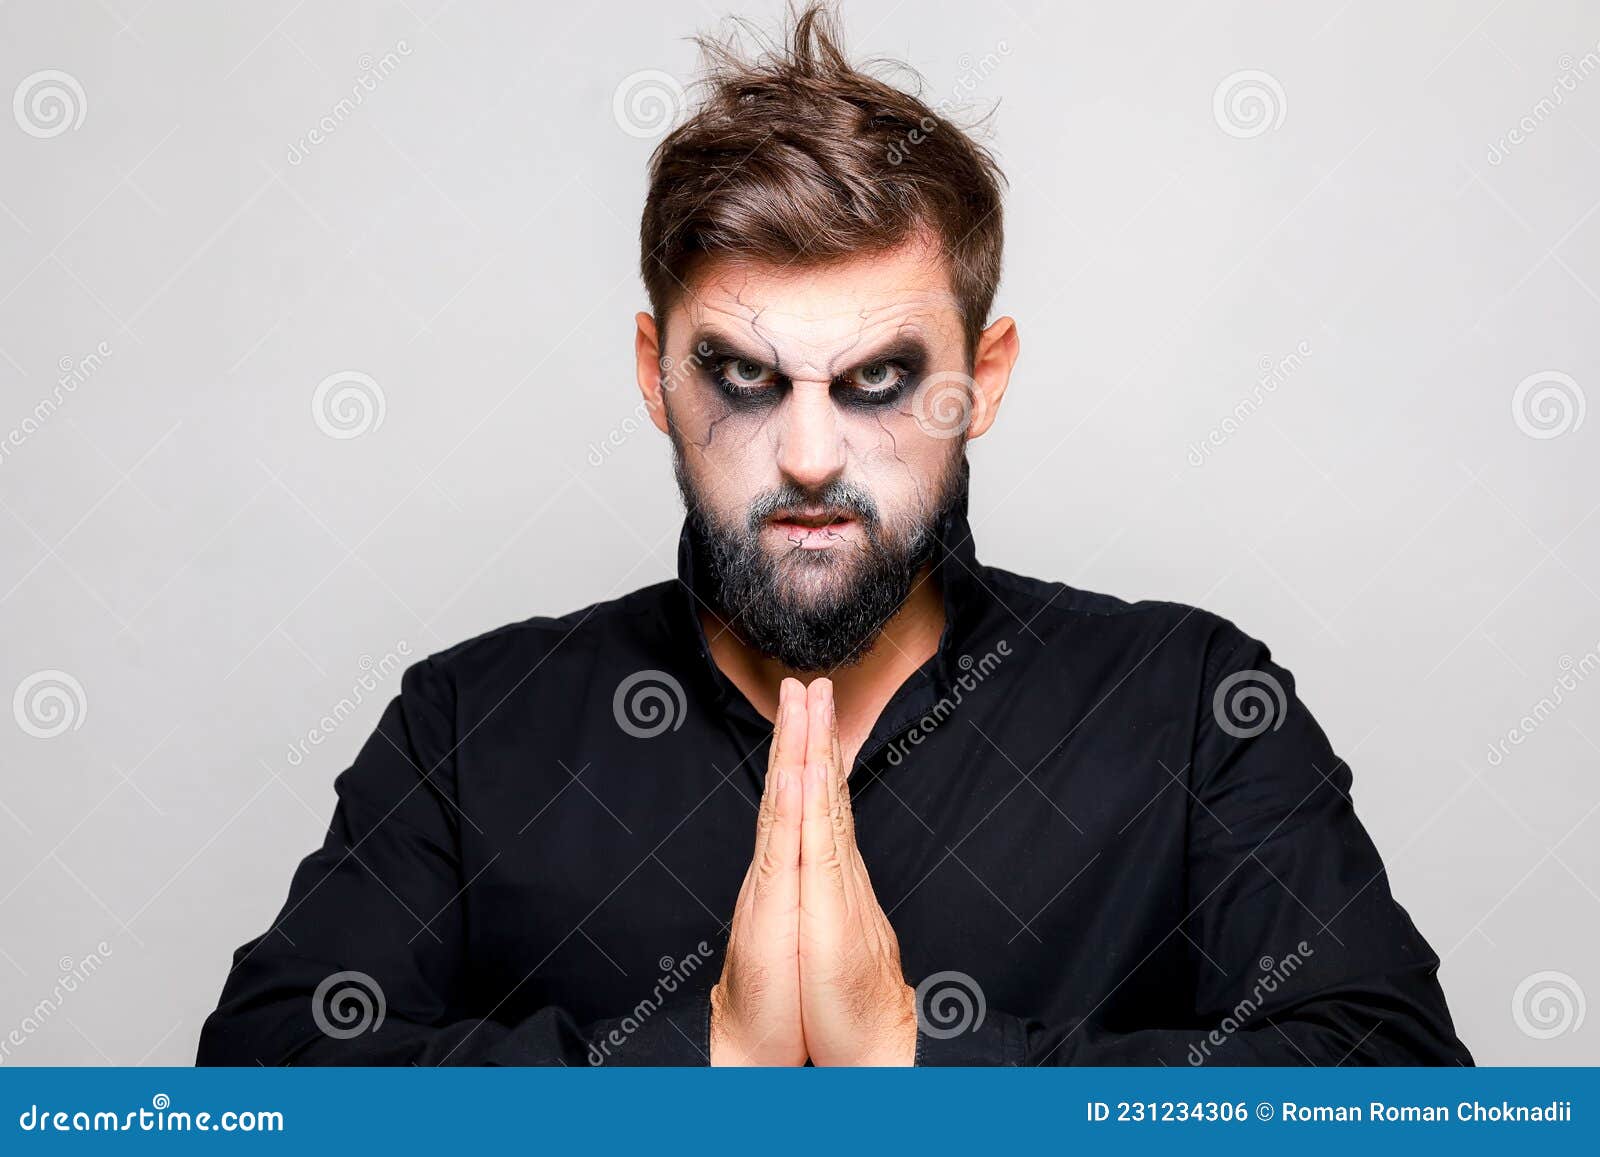 Undead-style Makeup for on Bearded Man Who Shows Gestures Stock Photo - Image jackolantern, male: 231234306